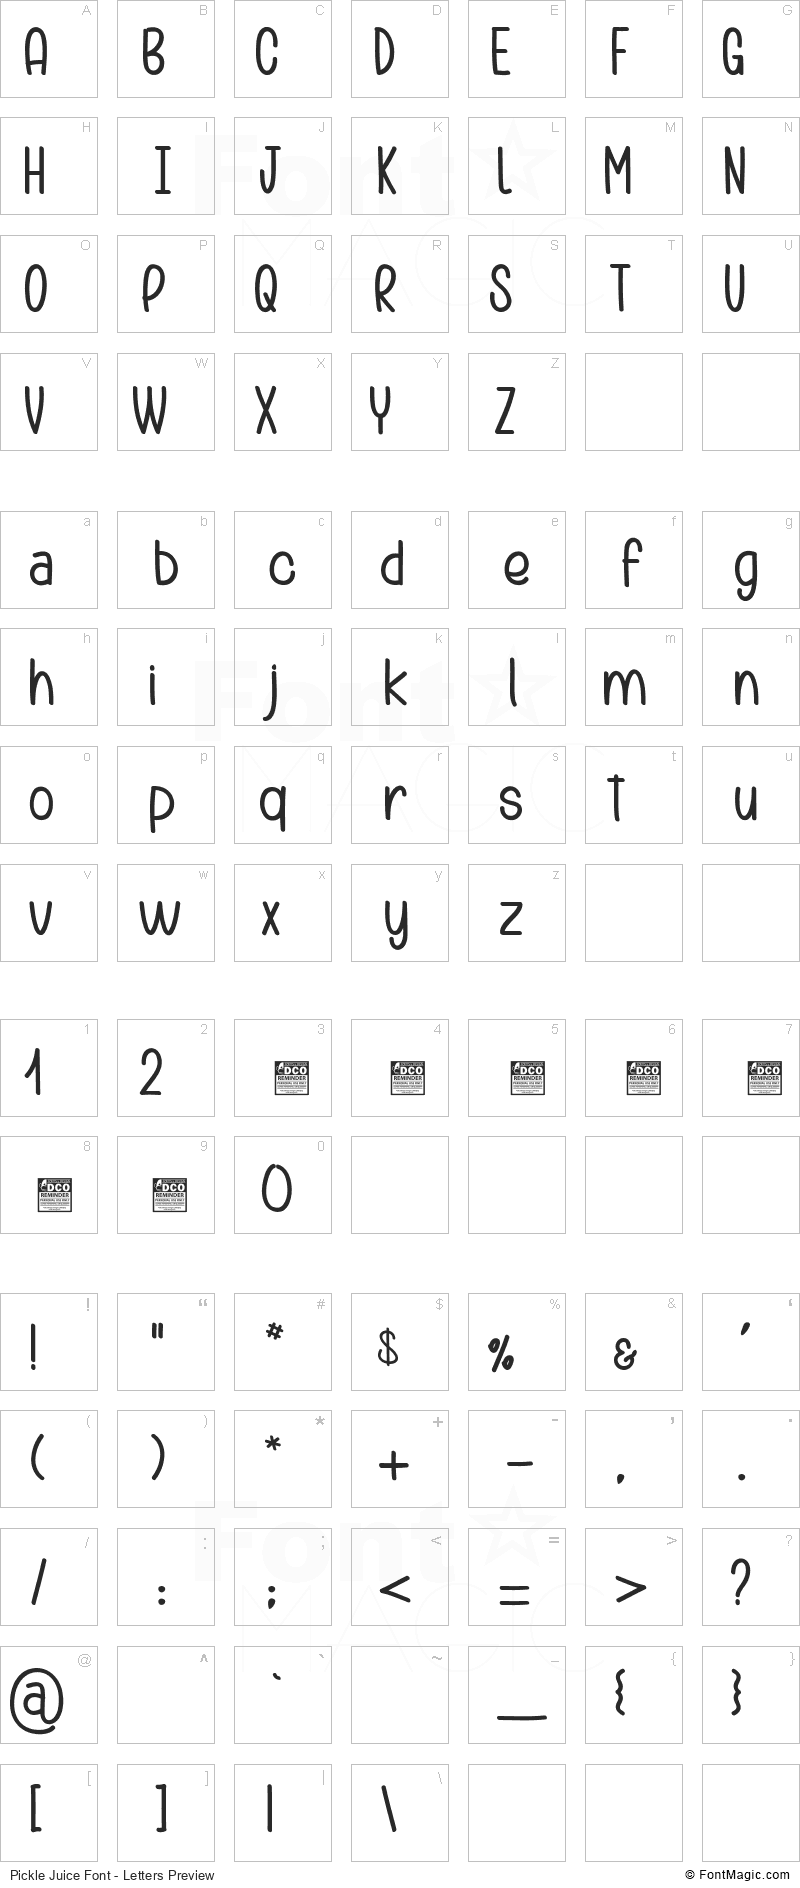 Pickle Juice Font - All Latters Preview Chart